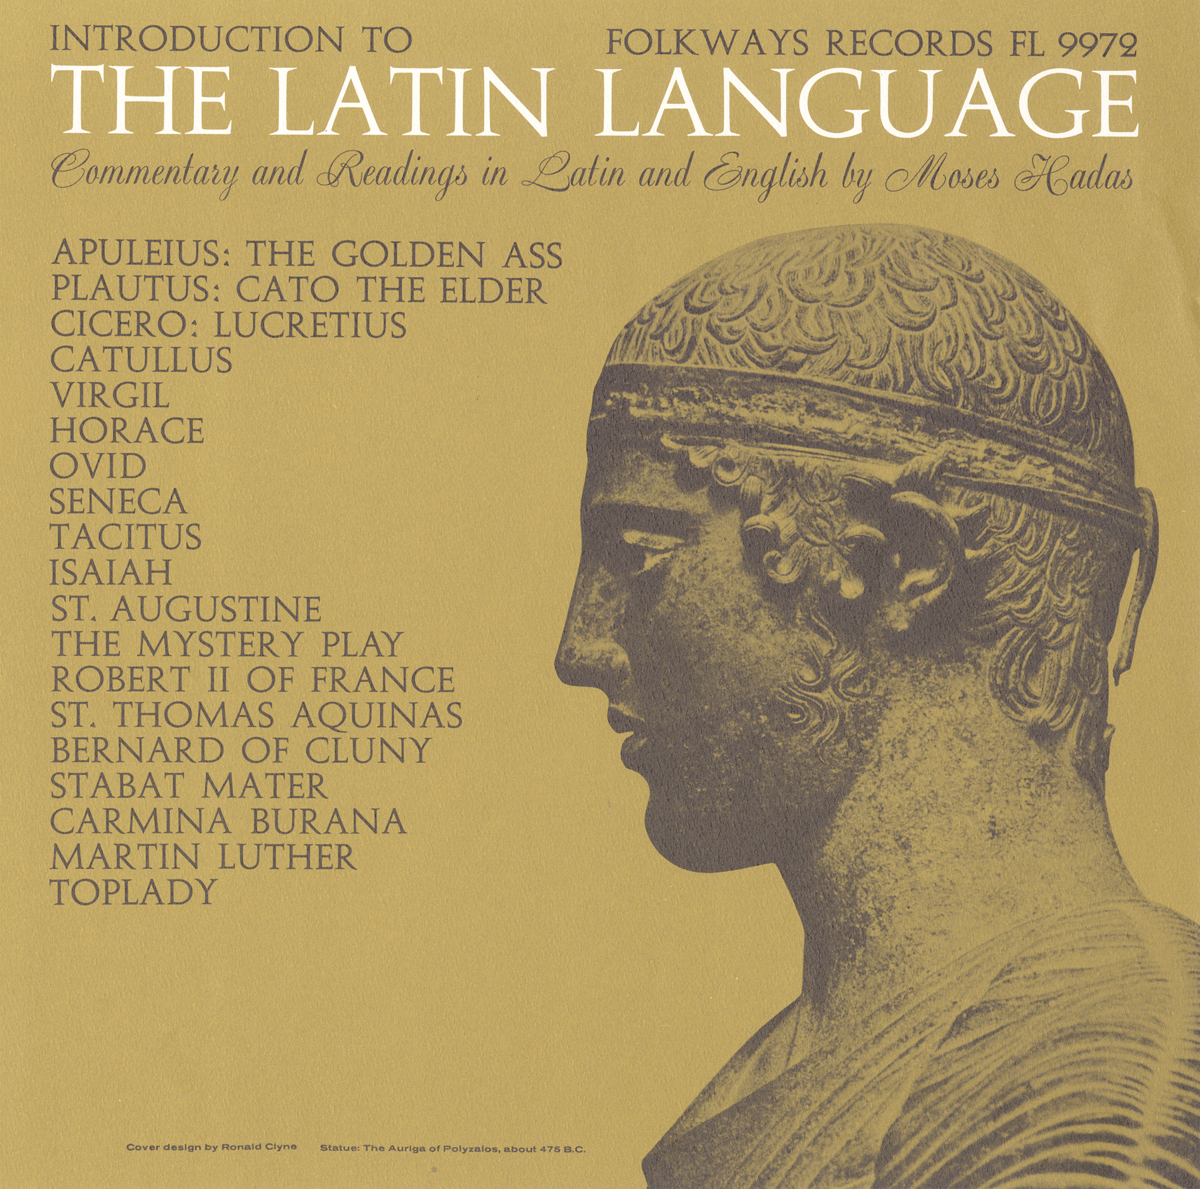 LATIN LANGUAGE: INTRODUCTION AND READING IN LATIN